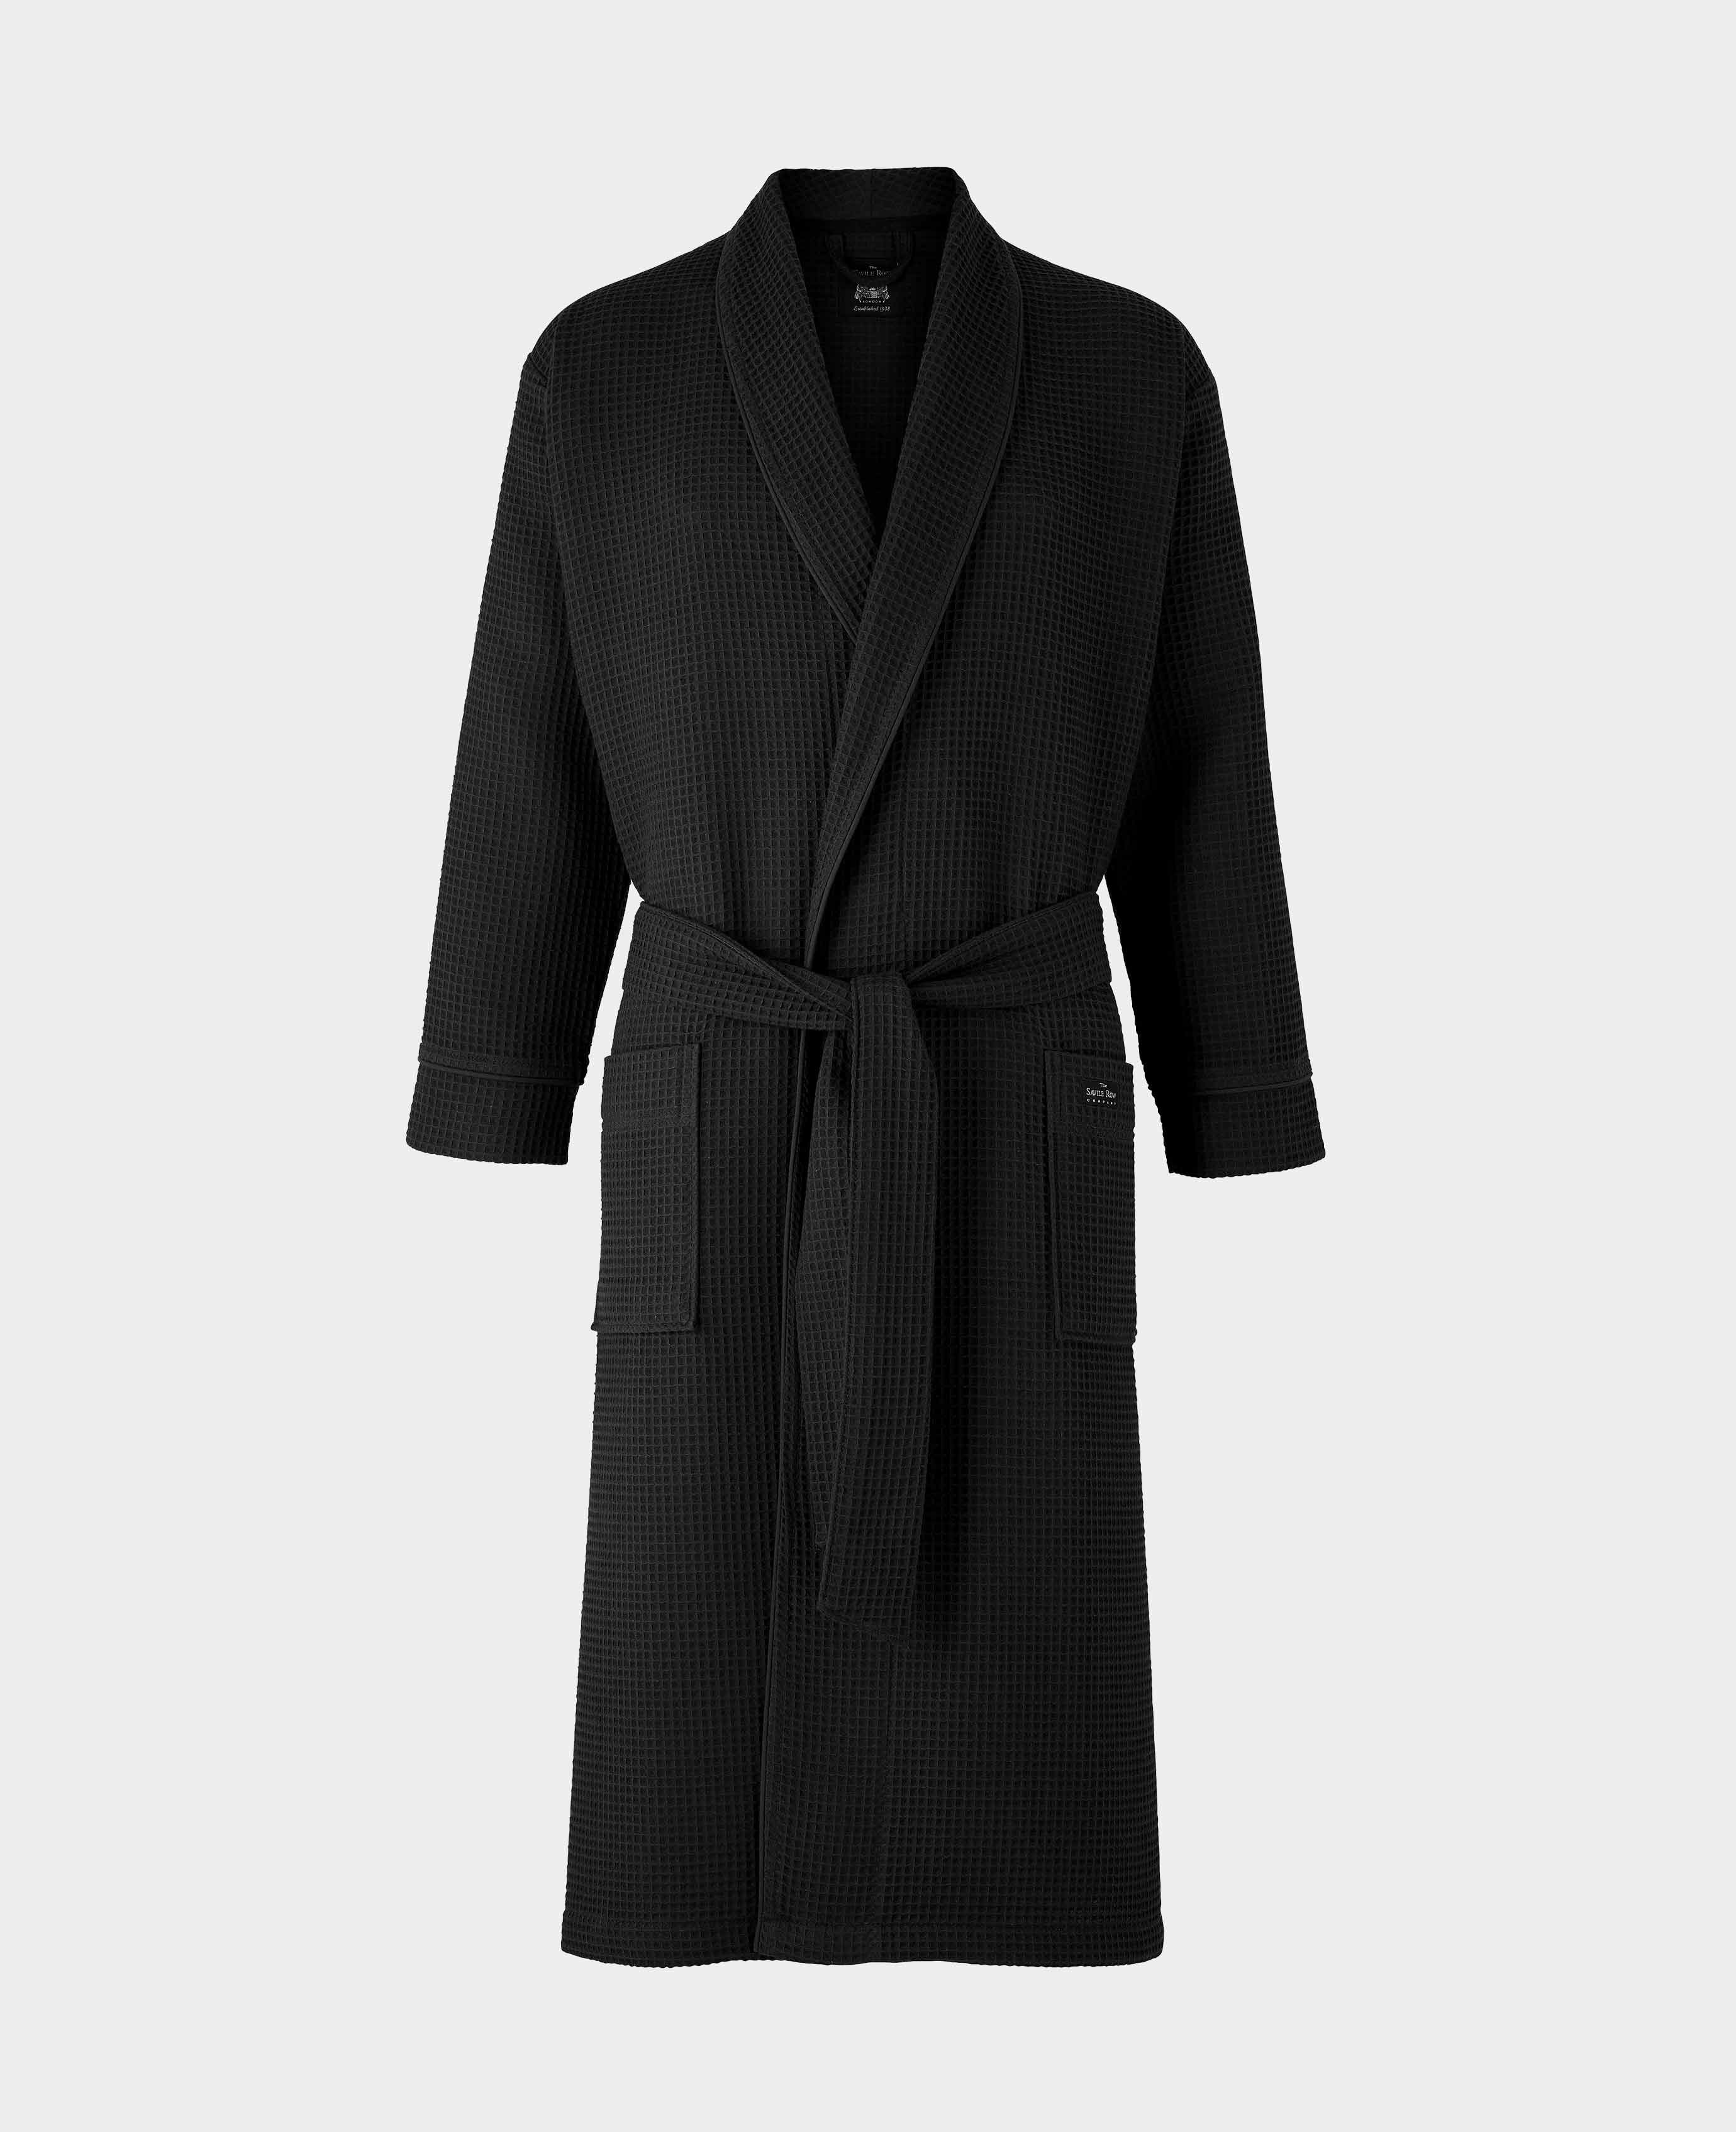 Hotel Collection Cotton Waffle Textured Bath Robe, Created for Macy's -  Macy's